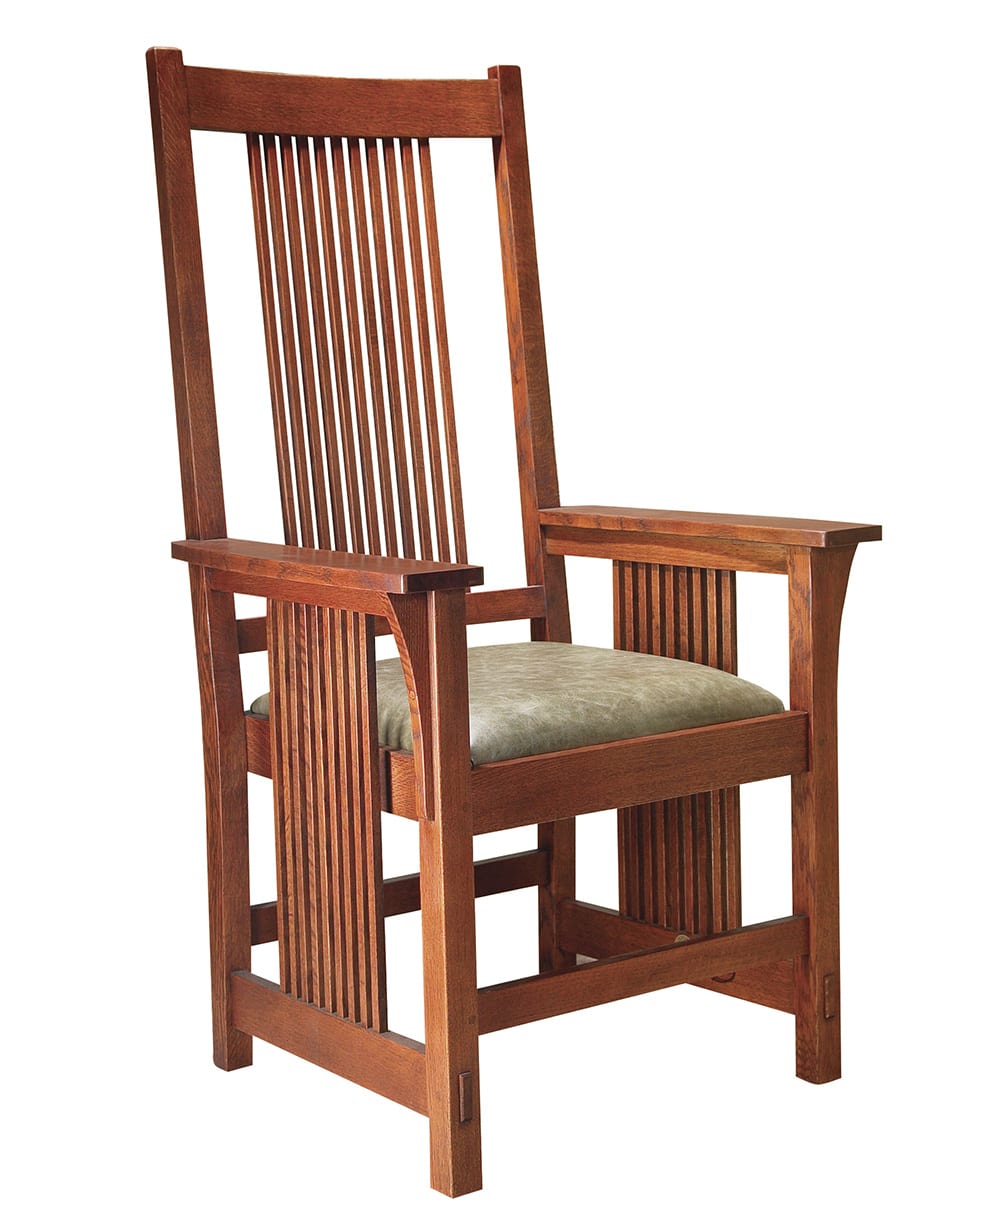 Spindle Arm Chair - Stickley Brand